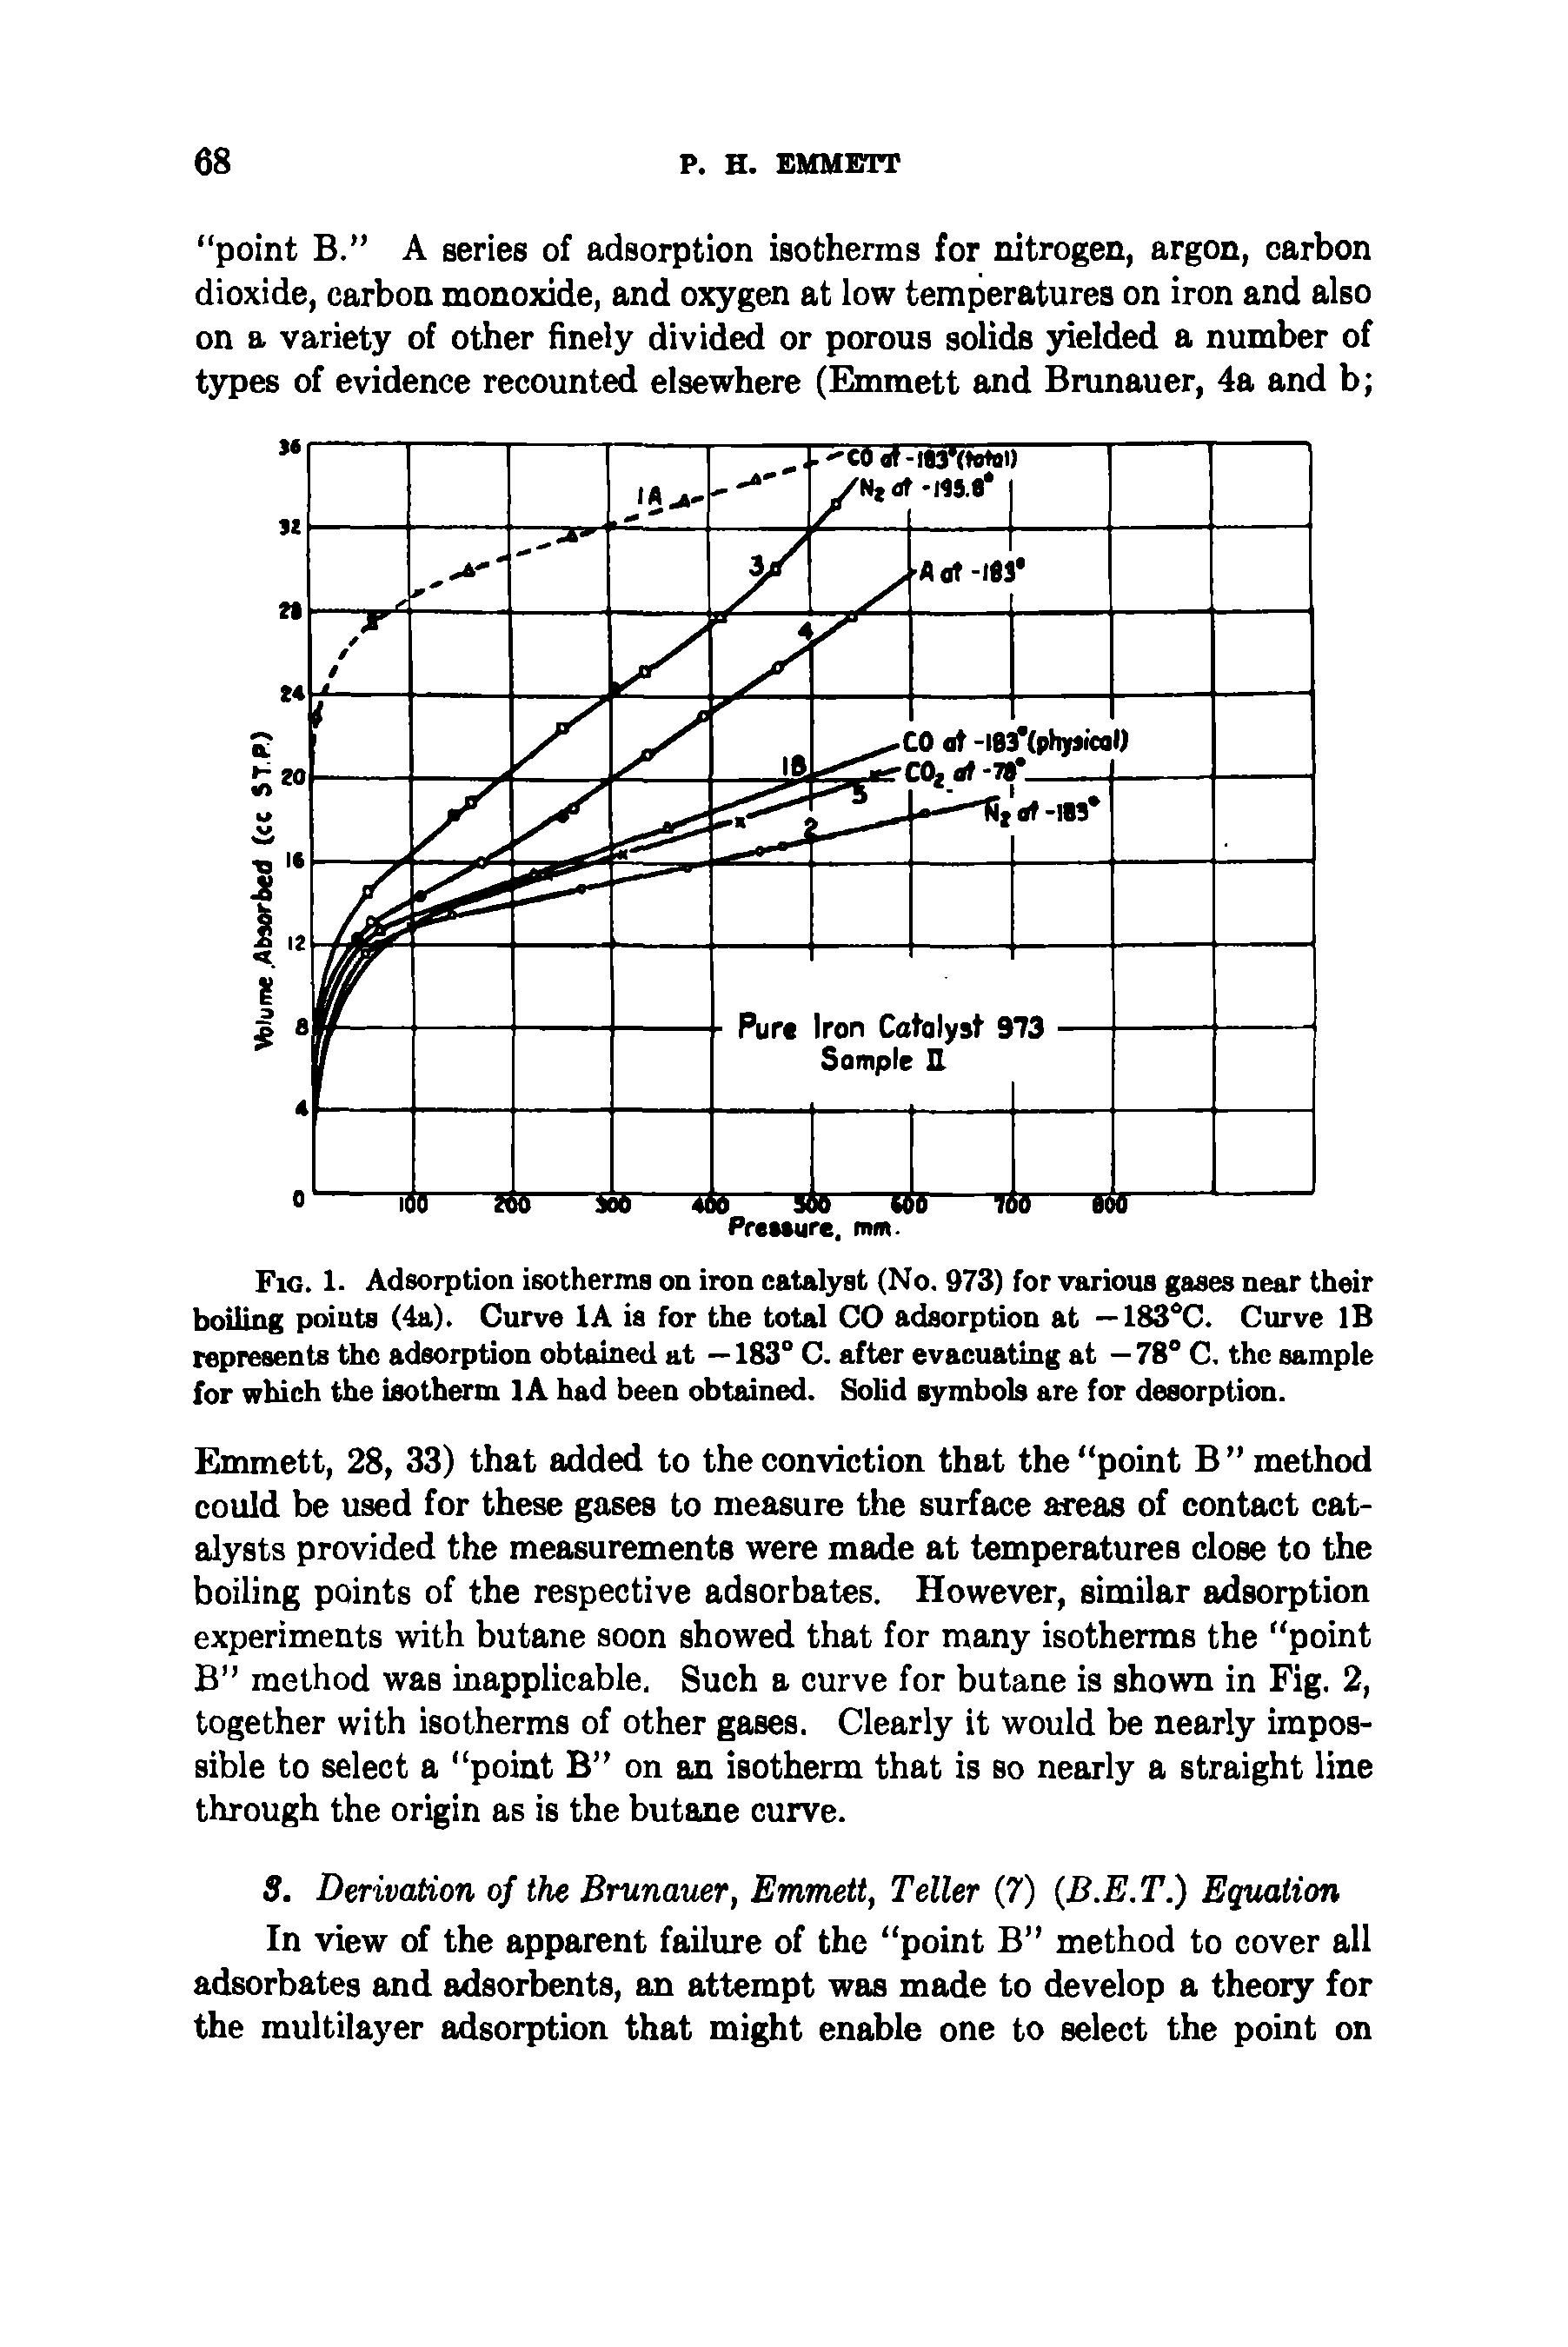 Fig. 1. Adsorption isotherms on iron catalyst (No. 973) for various gases near their boiling points (4a). Curve lA is for the total CO adsorption at — 183°C. Curve 16 represents the adsorption obtained at —183 C. after evacuating at — 78 C. the sample for which the isotherm lA had been obtained. Solid symbols are for desorption.